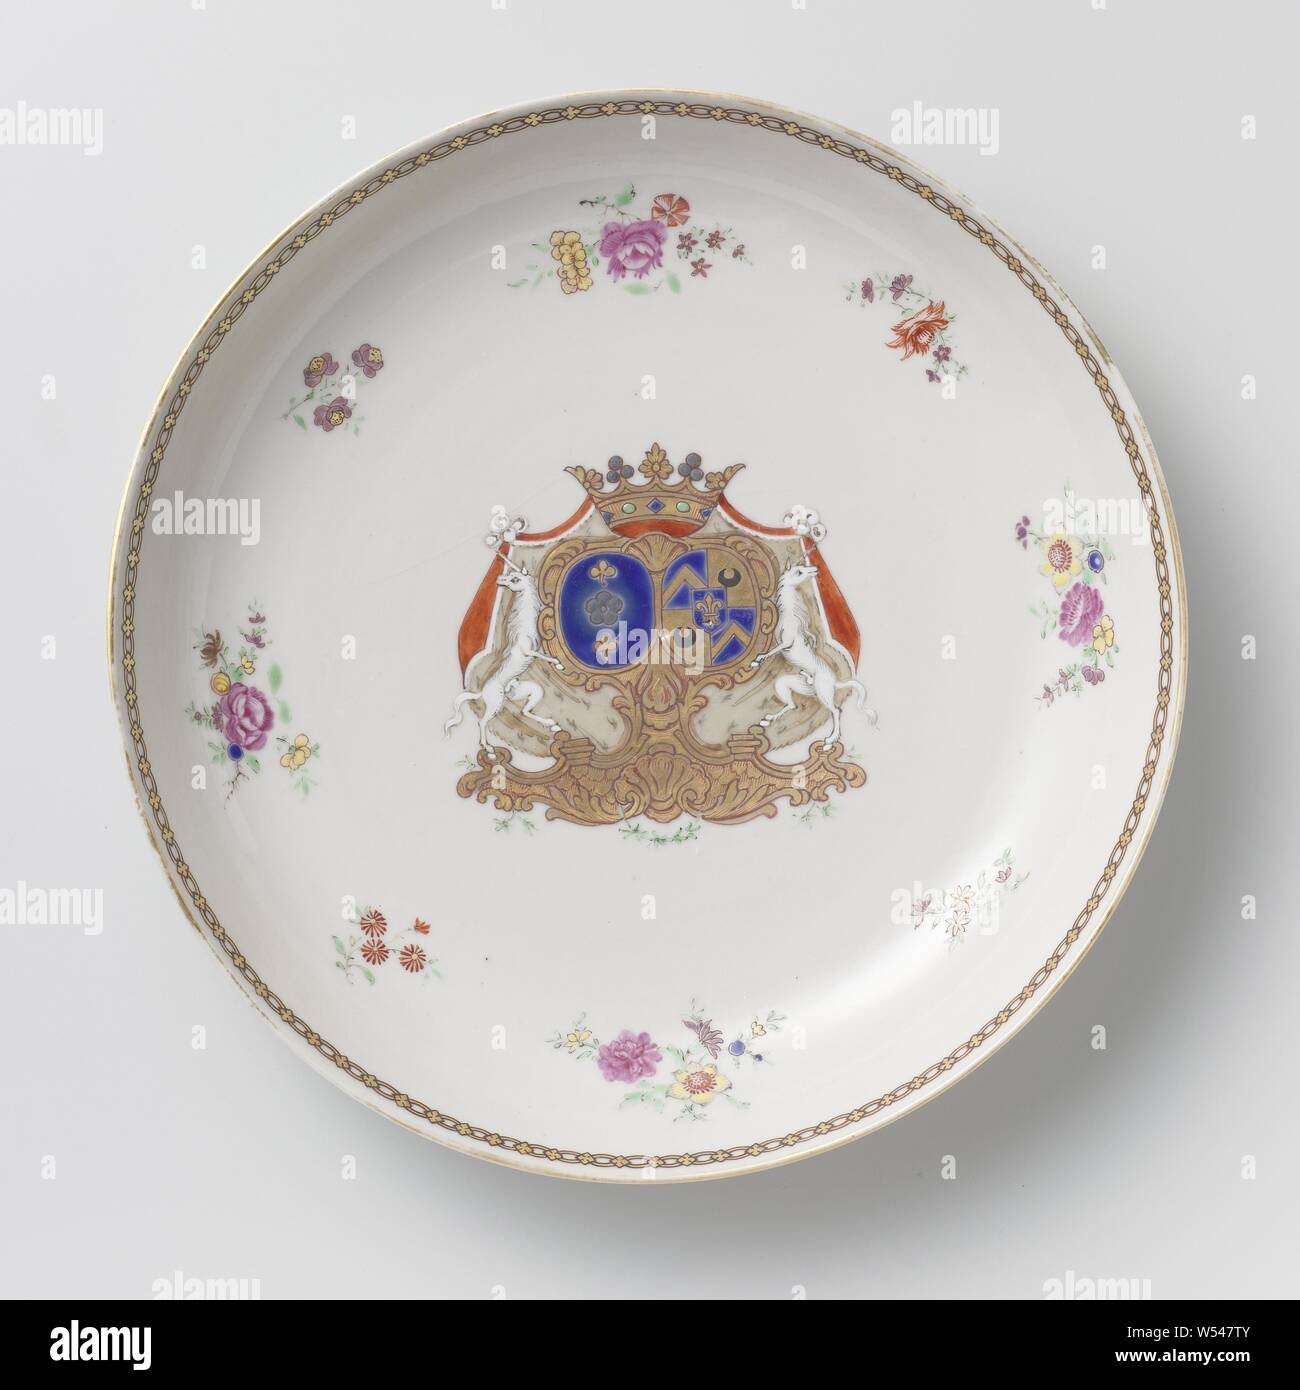 Saucer-dish with the arms of the Van Idsinga and Kien families, Porcelain plate, painted on the glaze in blue, red, pink, green, yellow, purple, black and gold. On the flat the alliance weapon of the Van Idsinga and Kien families. The coat of arms to the left of the Van Idsinga family has a blue background with a silver rose or flower and a pair of golden clovers. The weapon to the right of the Kien family is divided into four parts: 1. and 4. a blue background with a golden twill, 2. and 3. a golden background with a black moon. In the center of the weapon is a heart shield with a blue Stock Photo